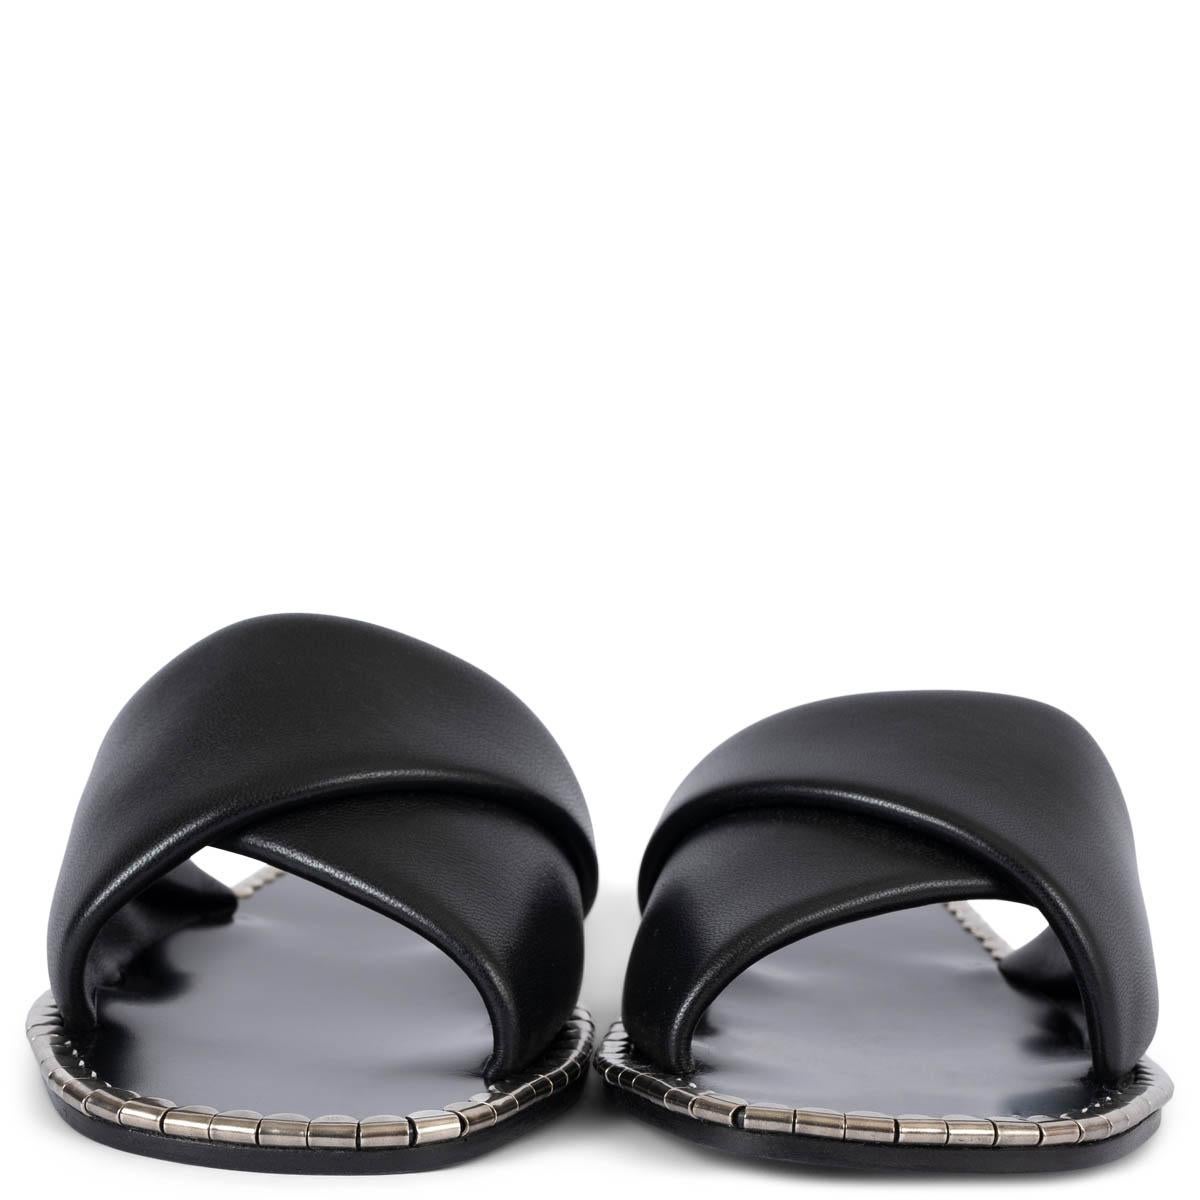 100% authentic Chloé Idol flat slide sandals with a black padded leather upper with silver metal scallops adding a touch of jewelry. Brand new.Come with dust bags. 

Measurements
Imprinted Size	37
Shoe Size	37
Inside Sole	24cm (9.4in)
Width	7.5cm